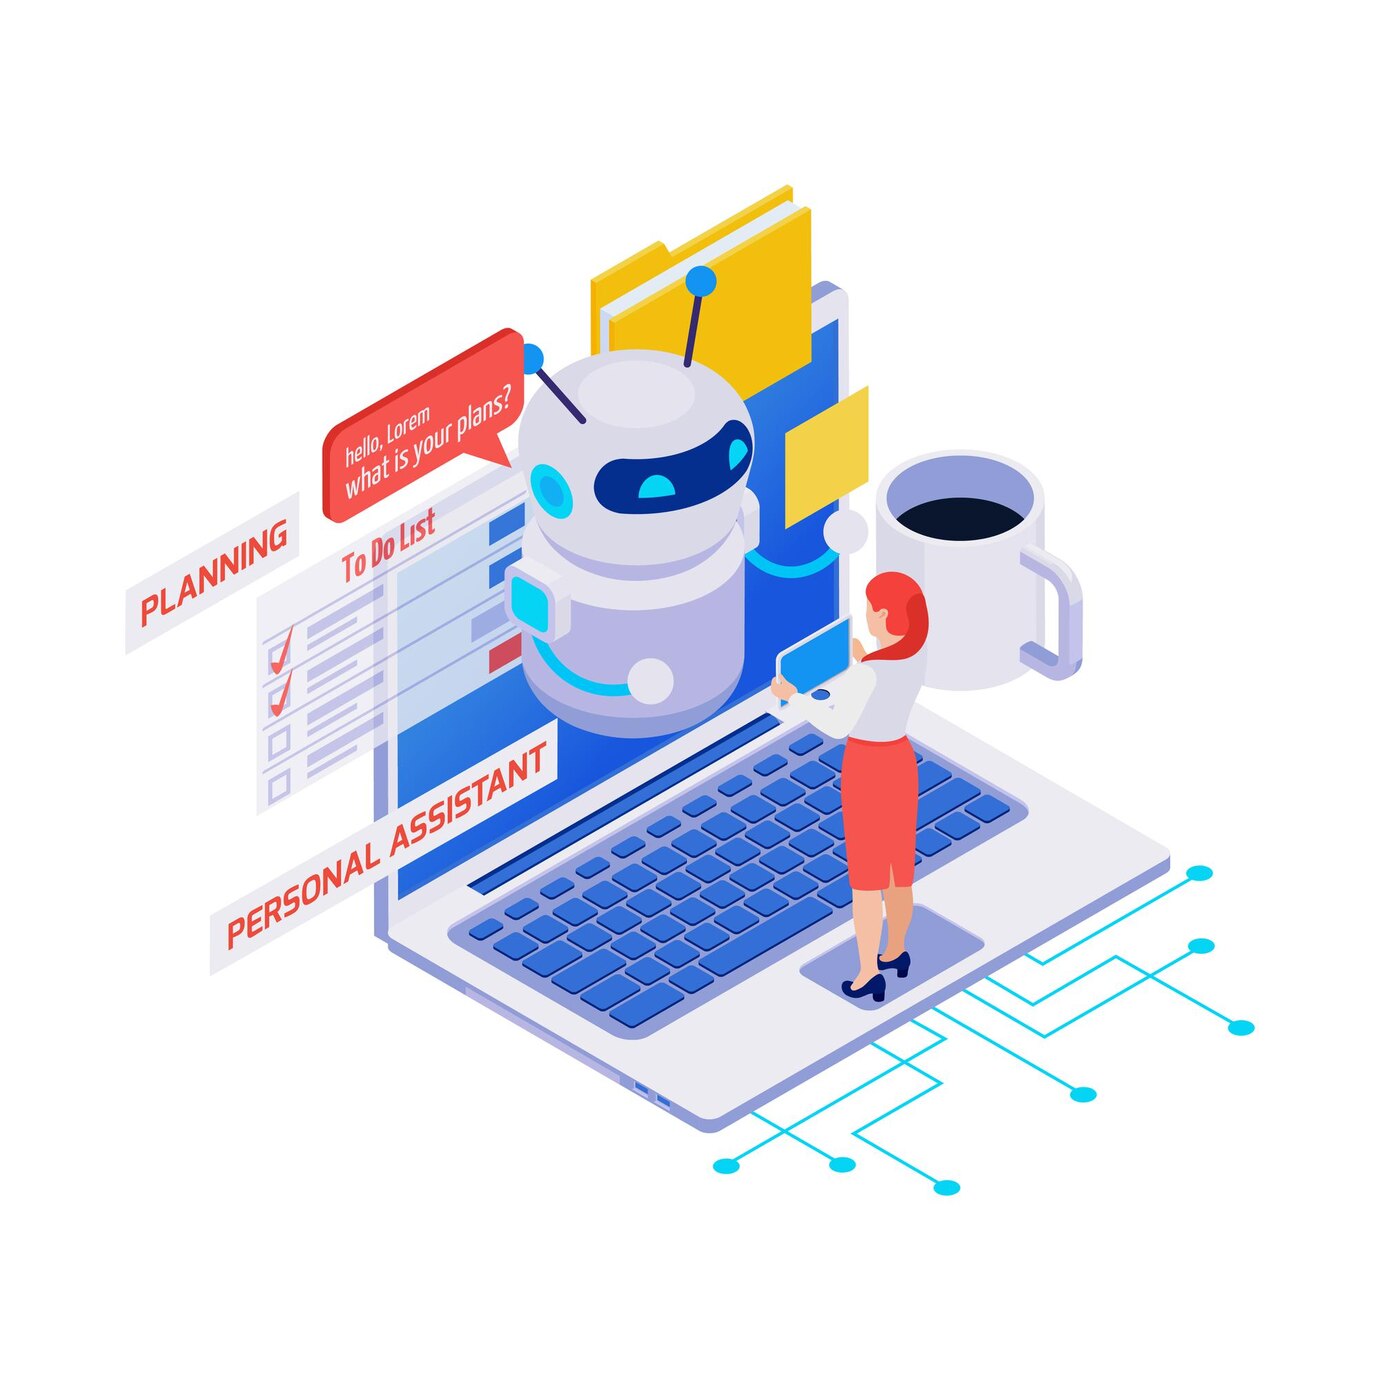 isometric-icon-with-woman-using-personal-assistant-planner-application-laptop-3d_1284-63047 (1)